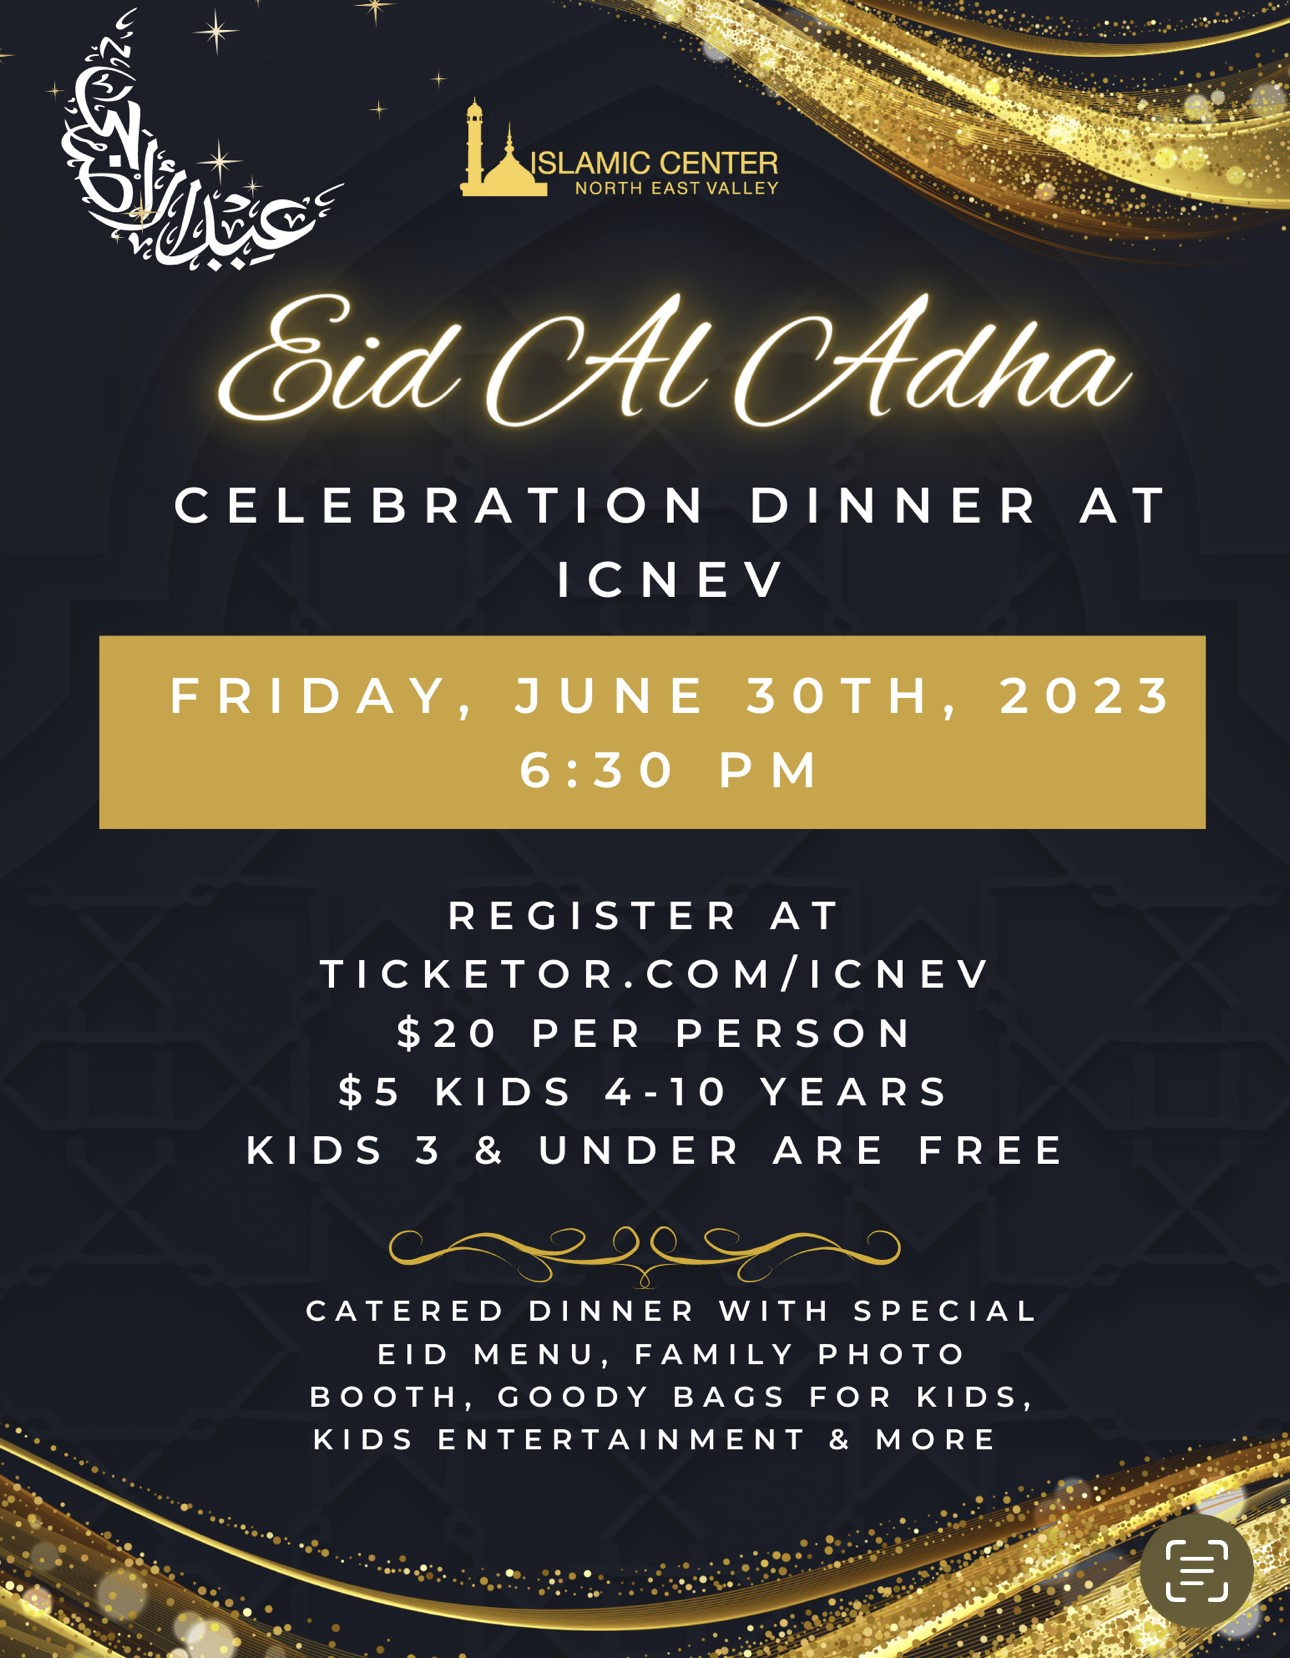 Eid Al Adha Celebration Dinner  on Jun 30, 18:00@Islamic Center of North East Valley - Buy tickets and Get information on Islamic Center of the North East Valley icnev